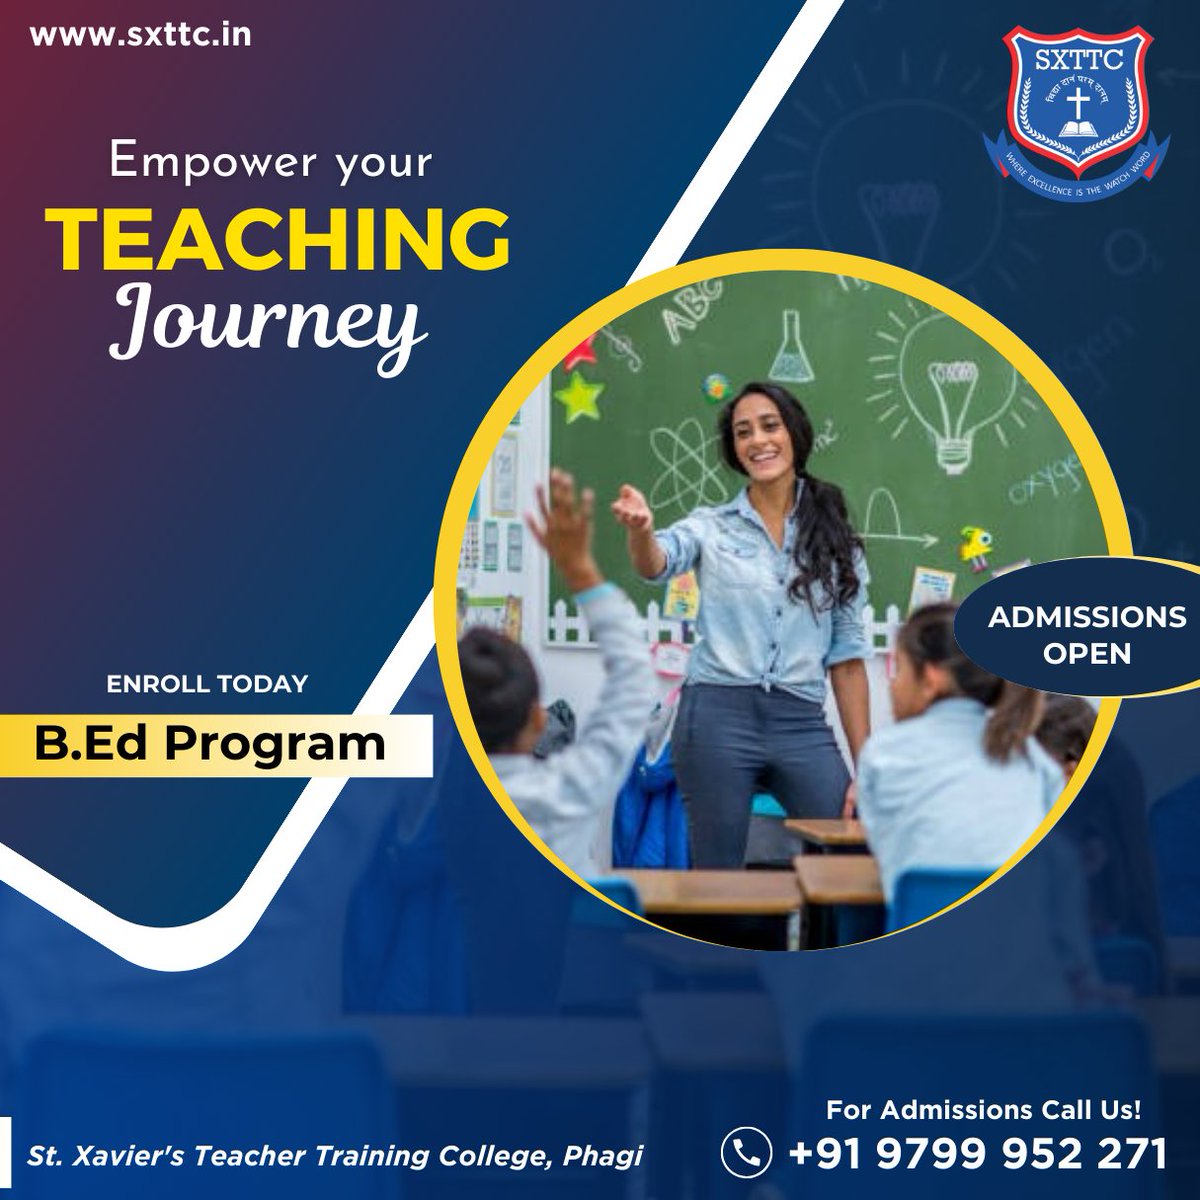 Empower your teaching journey with St. Xavier Teacher Training College! Explore our B.Ed program for a transformative learning experience and unlock your potential as an educator.
𝑪𝒐𝒏𝒕𝒂𝒄𝒕 𝑼𝒔: +𝟵𝟭-𝟵𝟳𝟵𝟵 𝟵𝟱𝟮 𝟮𝟳𝟭

#SXTTC #TeacherTrainingCollege #Jaipurcollege